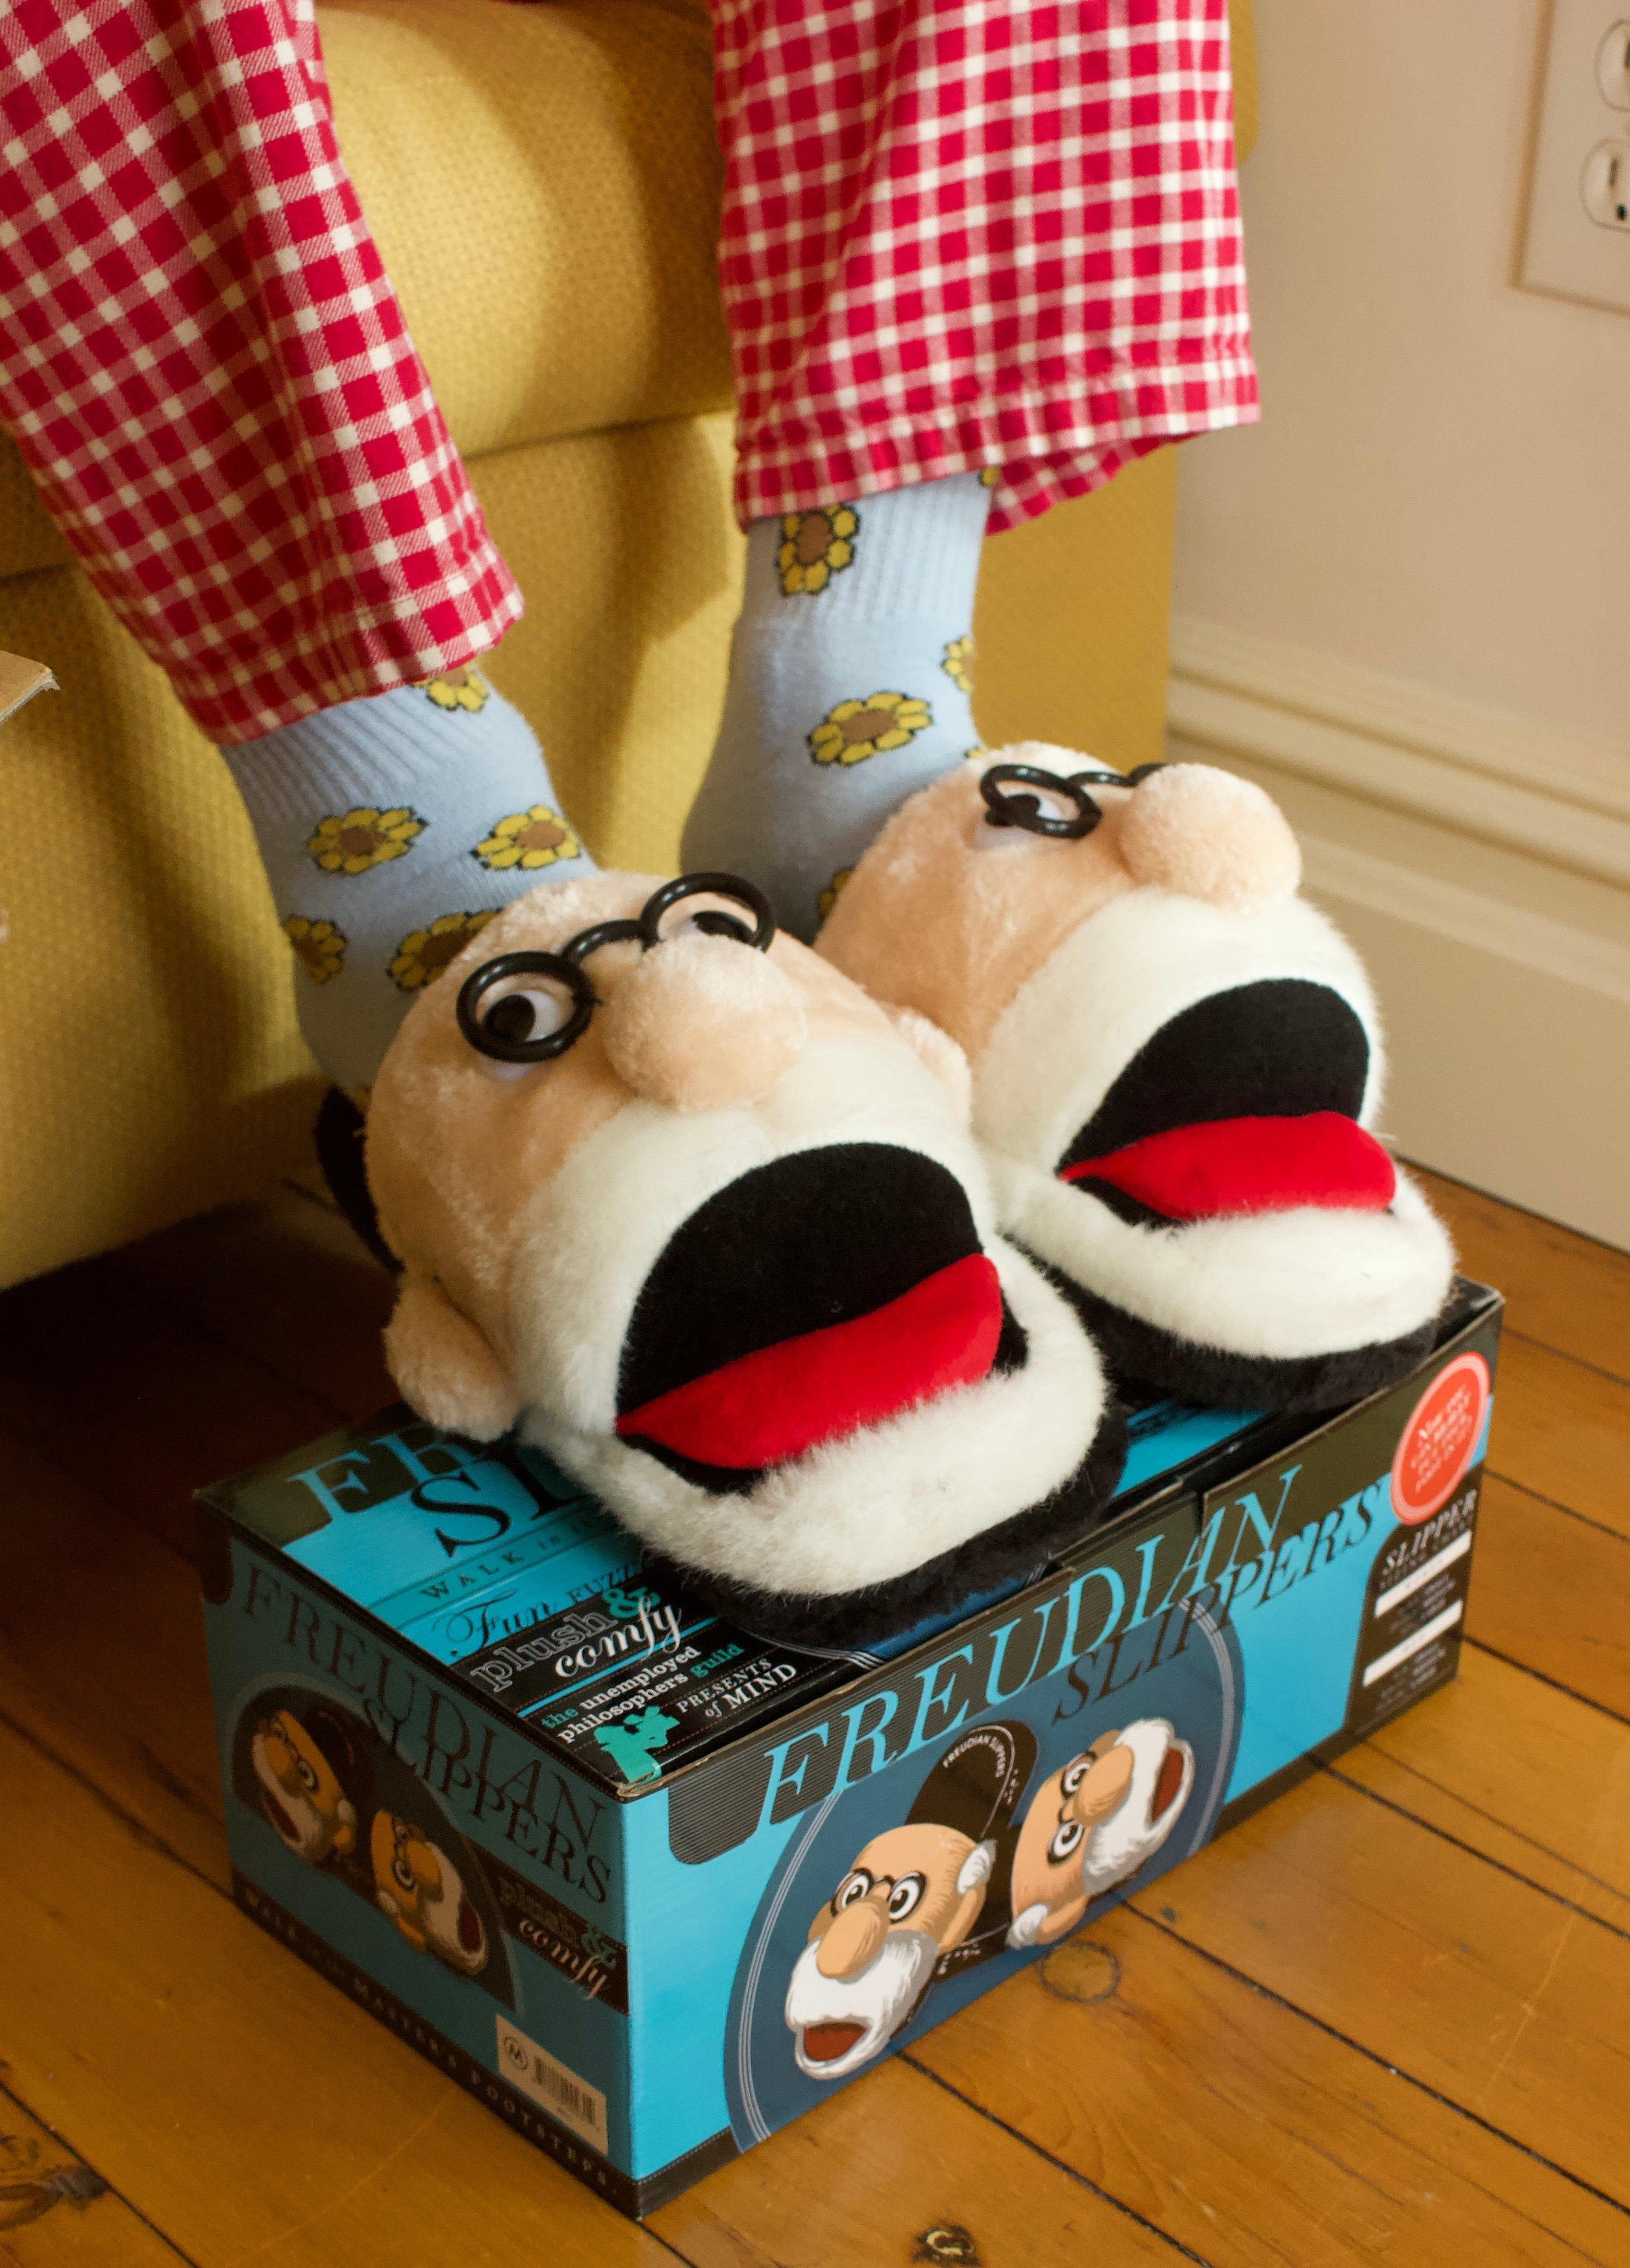 Product photo of Freudian Slippers, a novelty gift manufactured by The Unemployed Philosophers Guild.